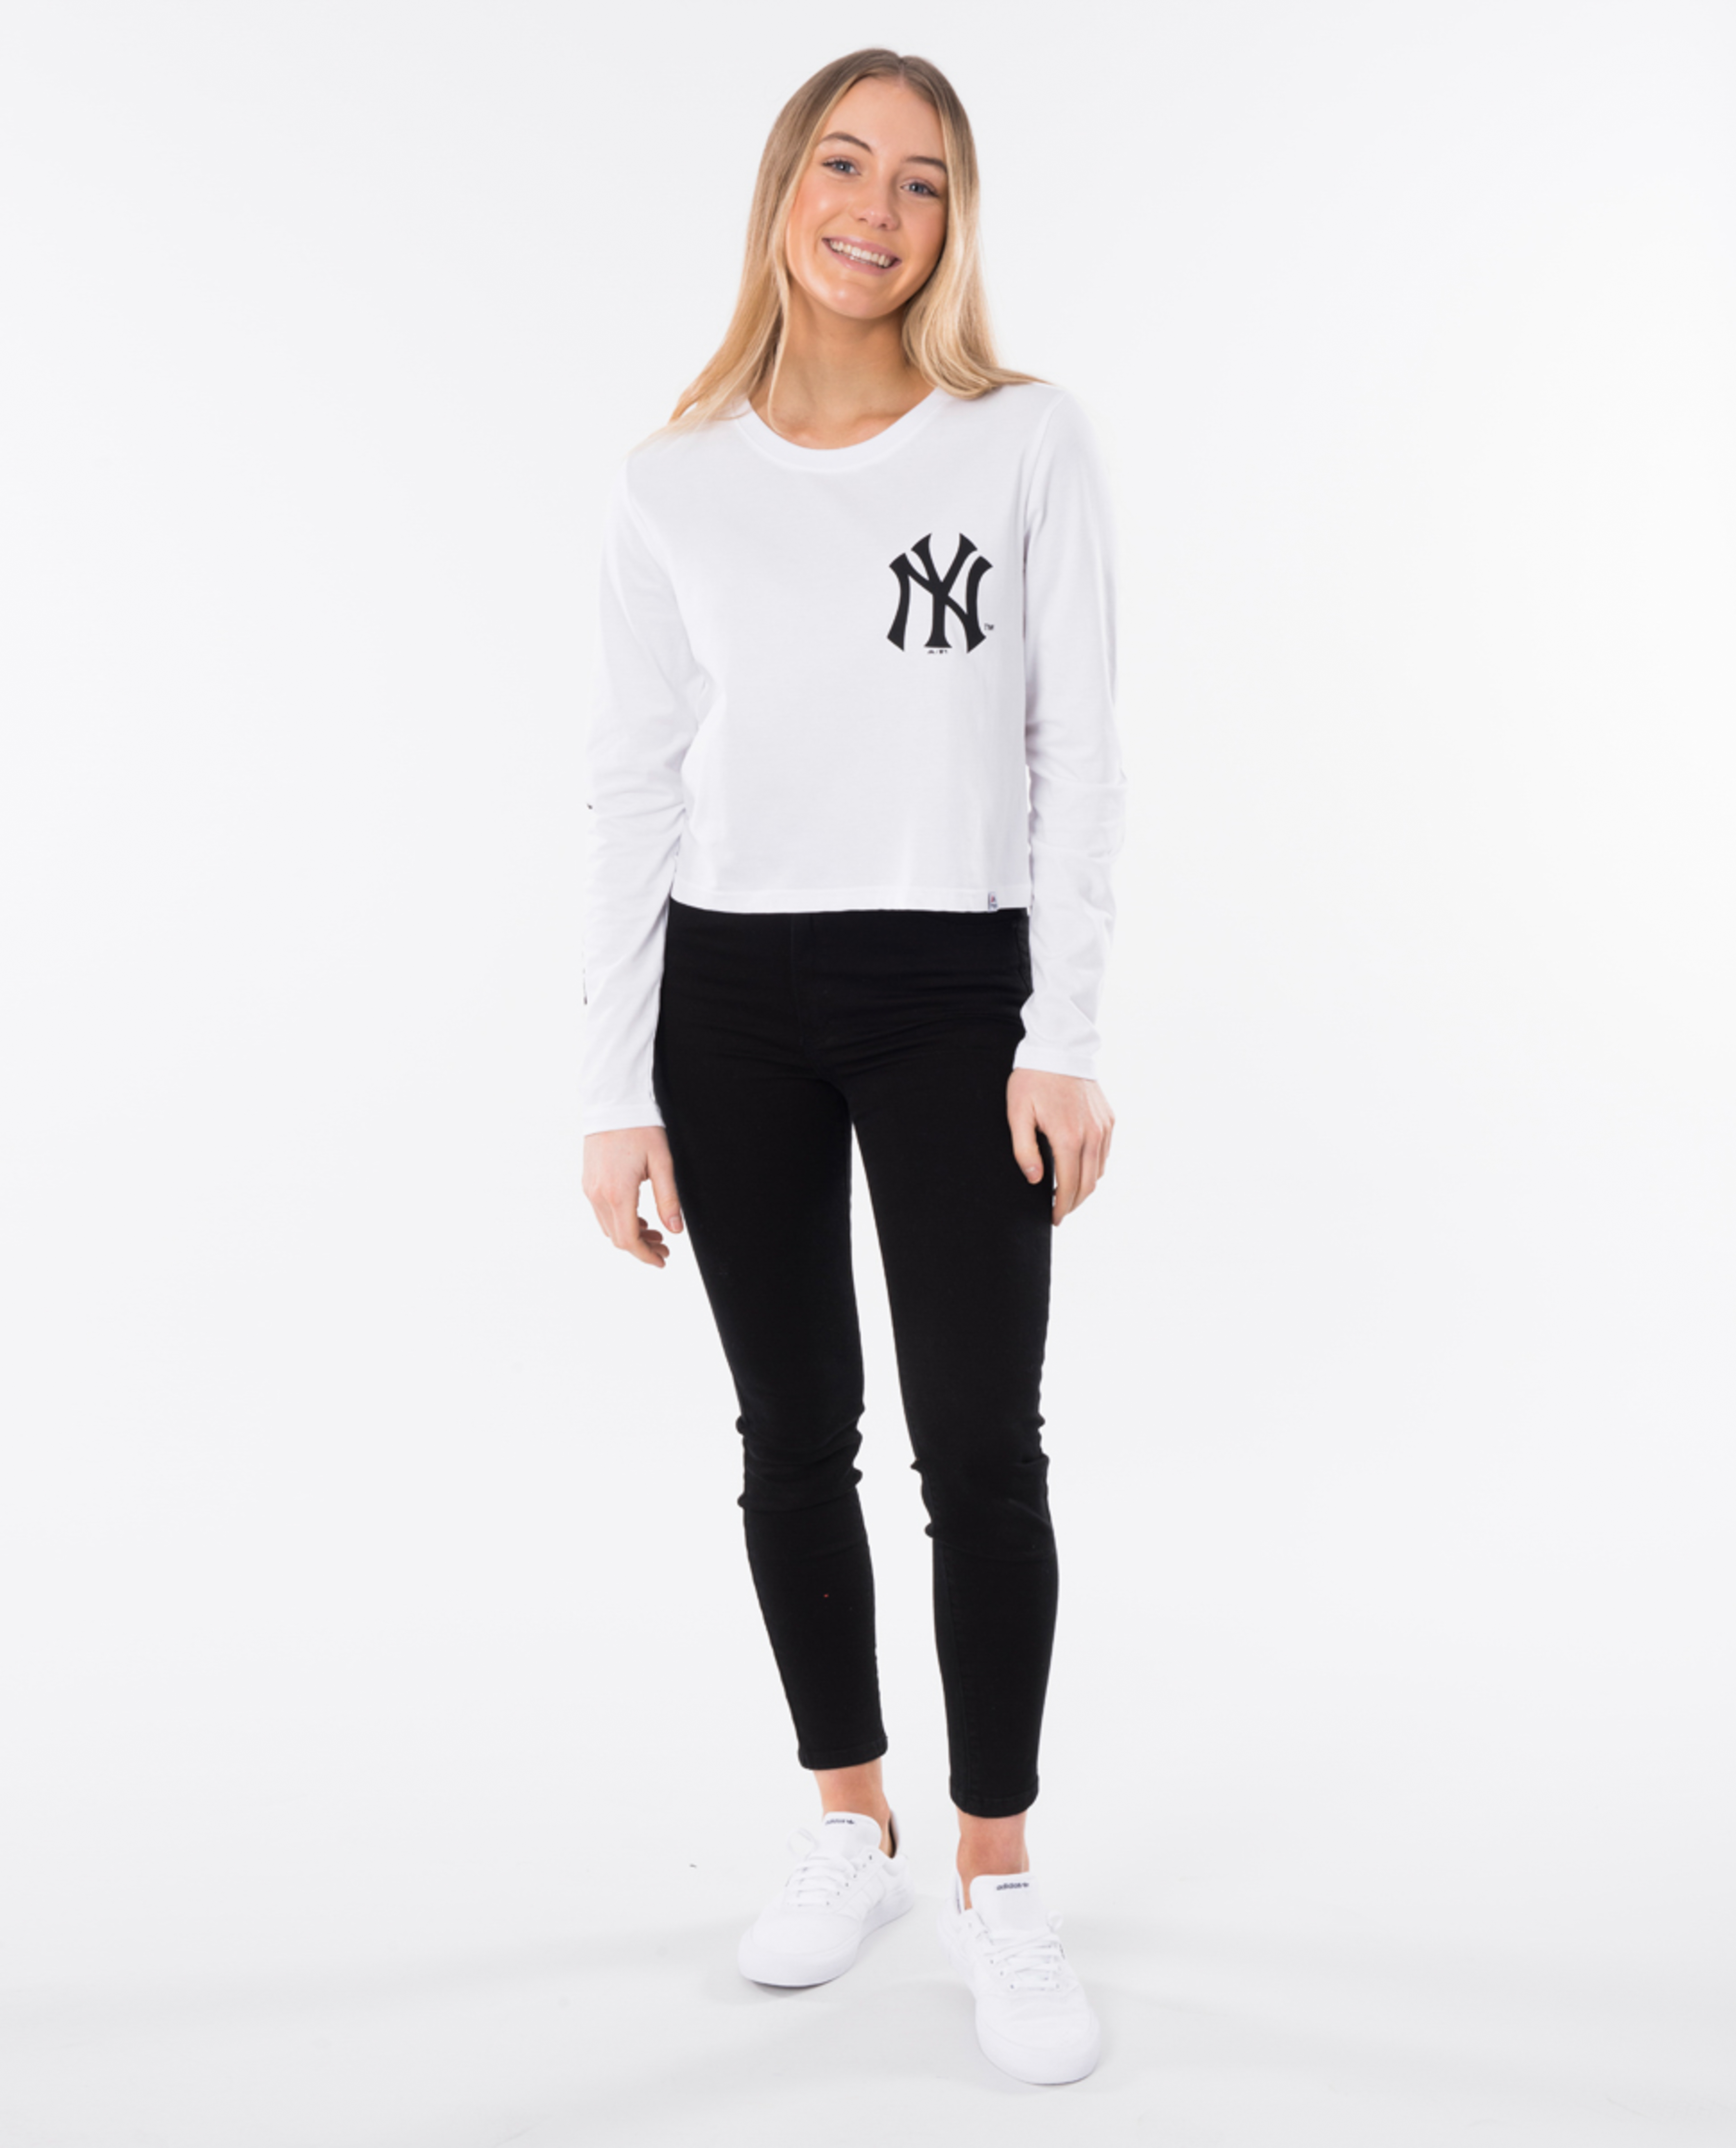 Majestic Knapp Cropped Ls Tee Ny Yankees Ozmosis Tops And T Shirts